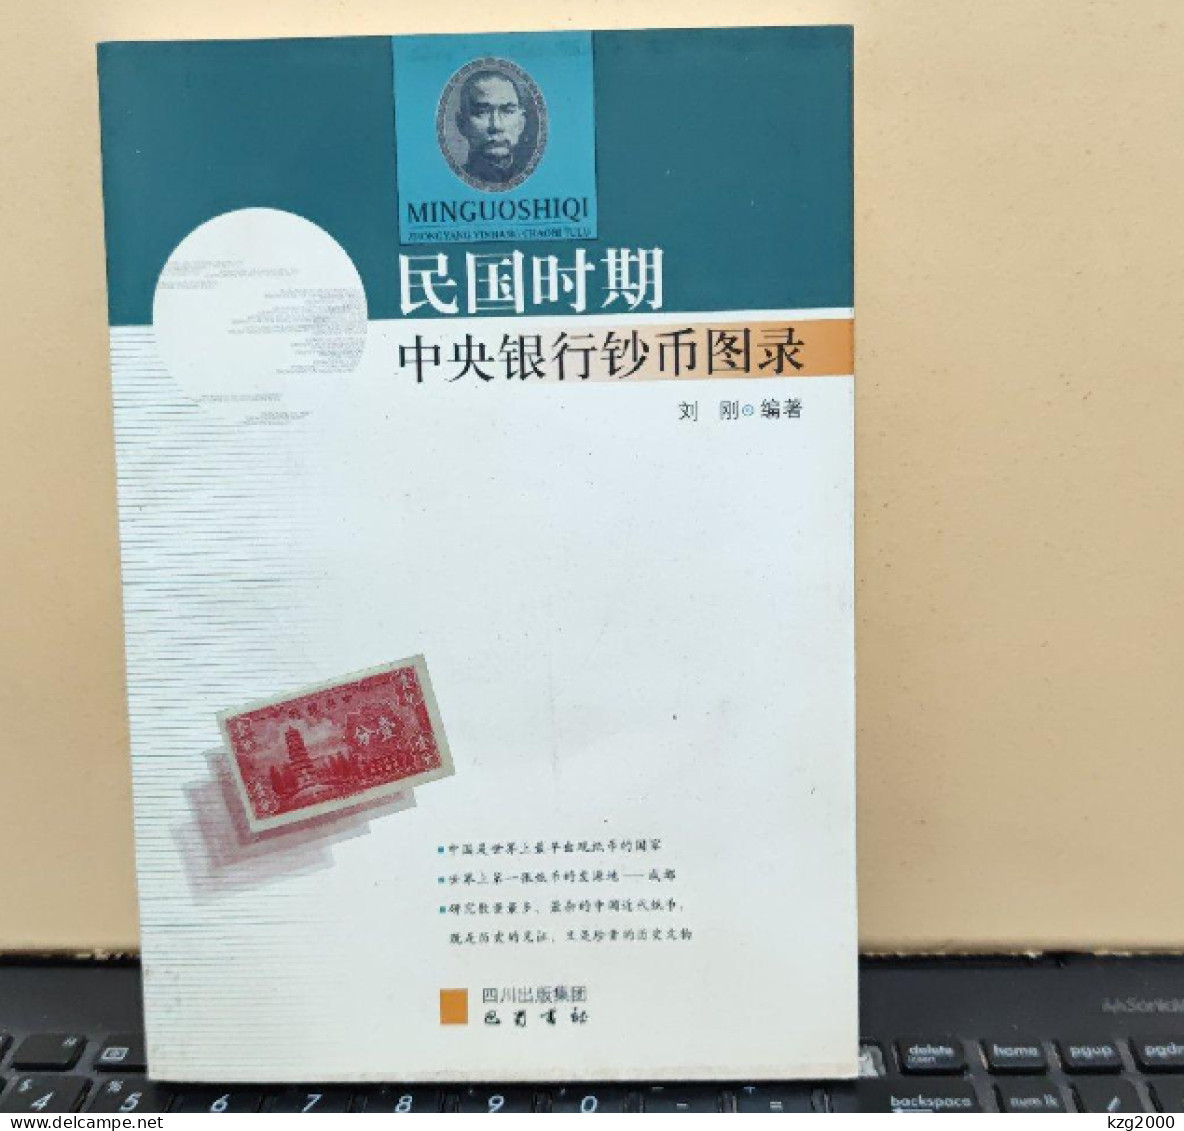 China ROC 1920-1949 Central Bank's Banknote Catalogue in the Republic of China